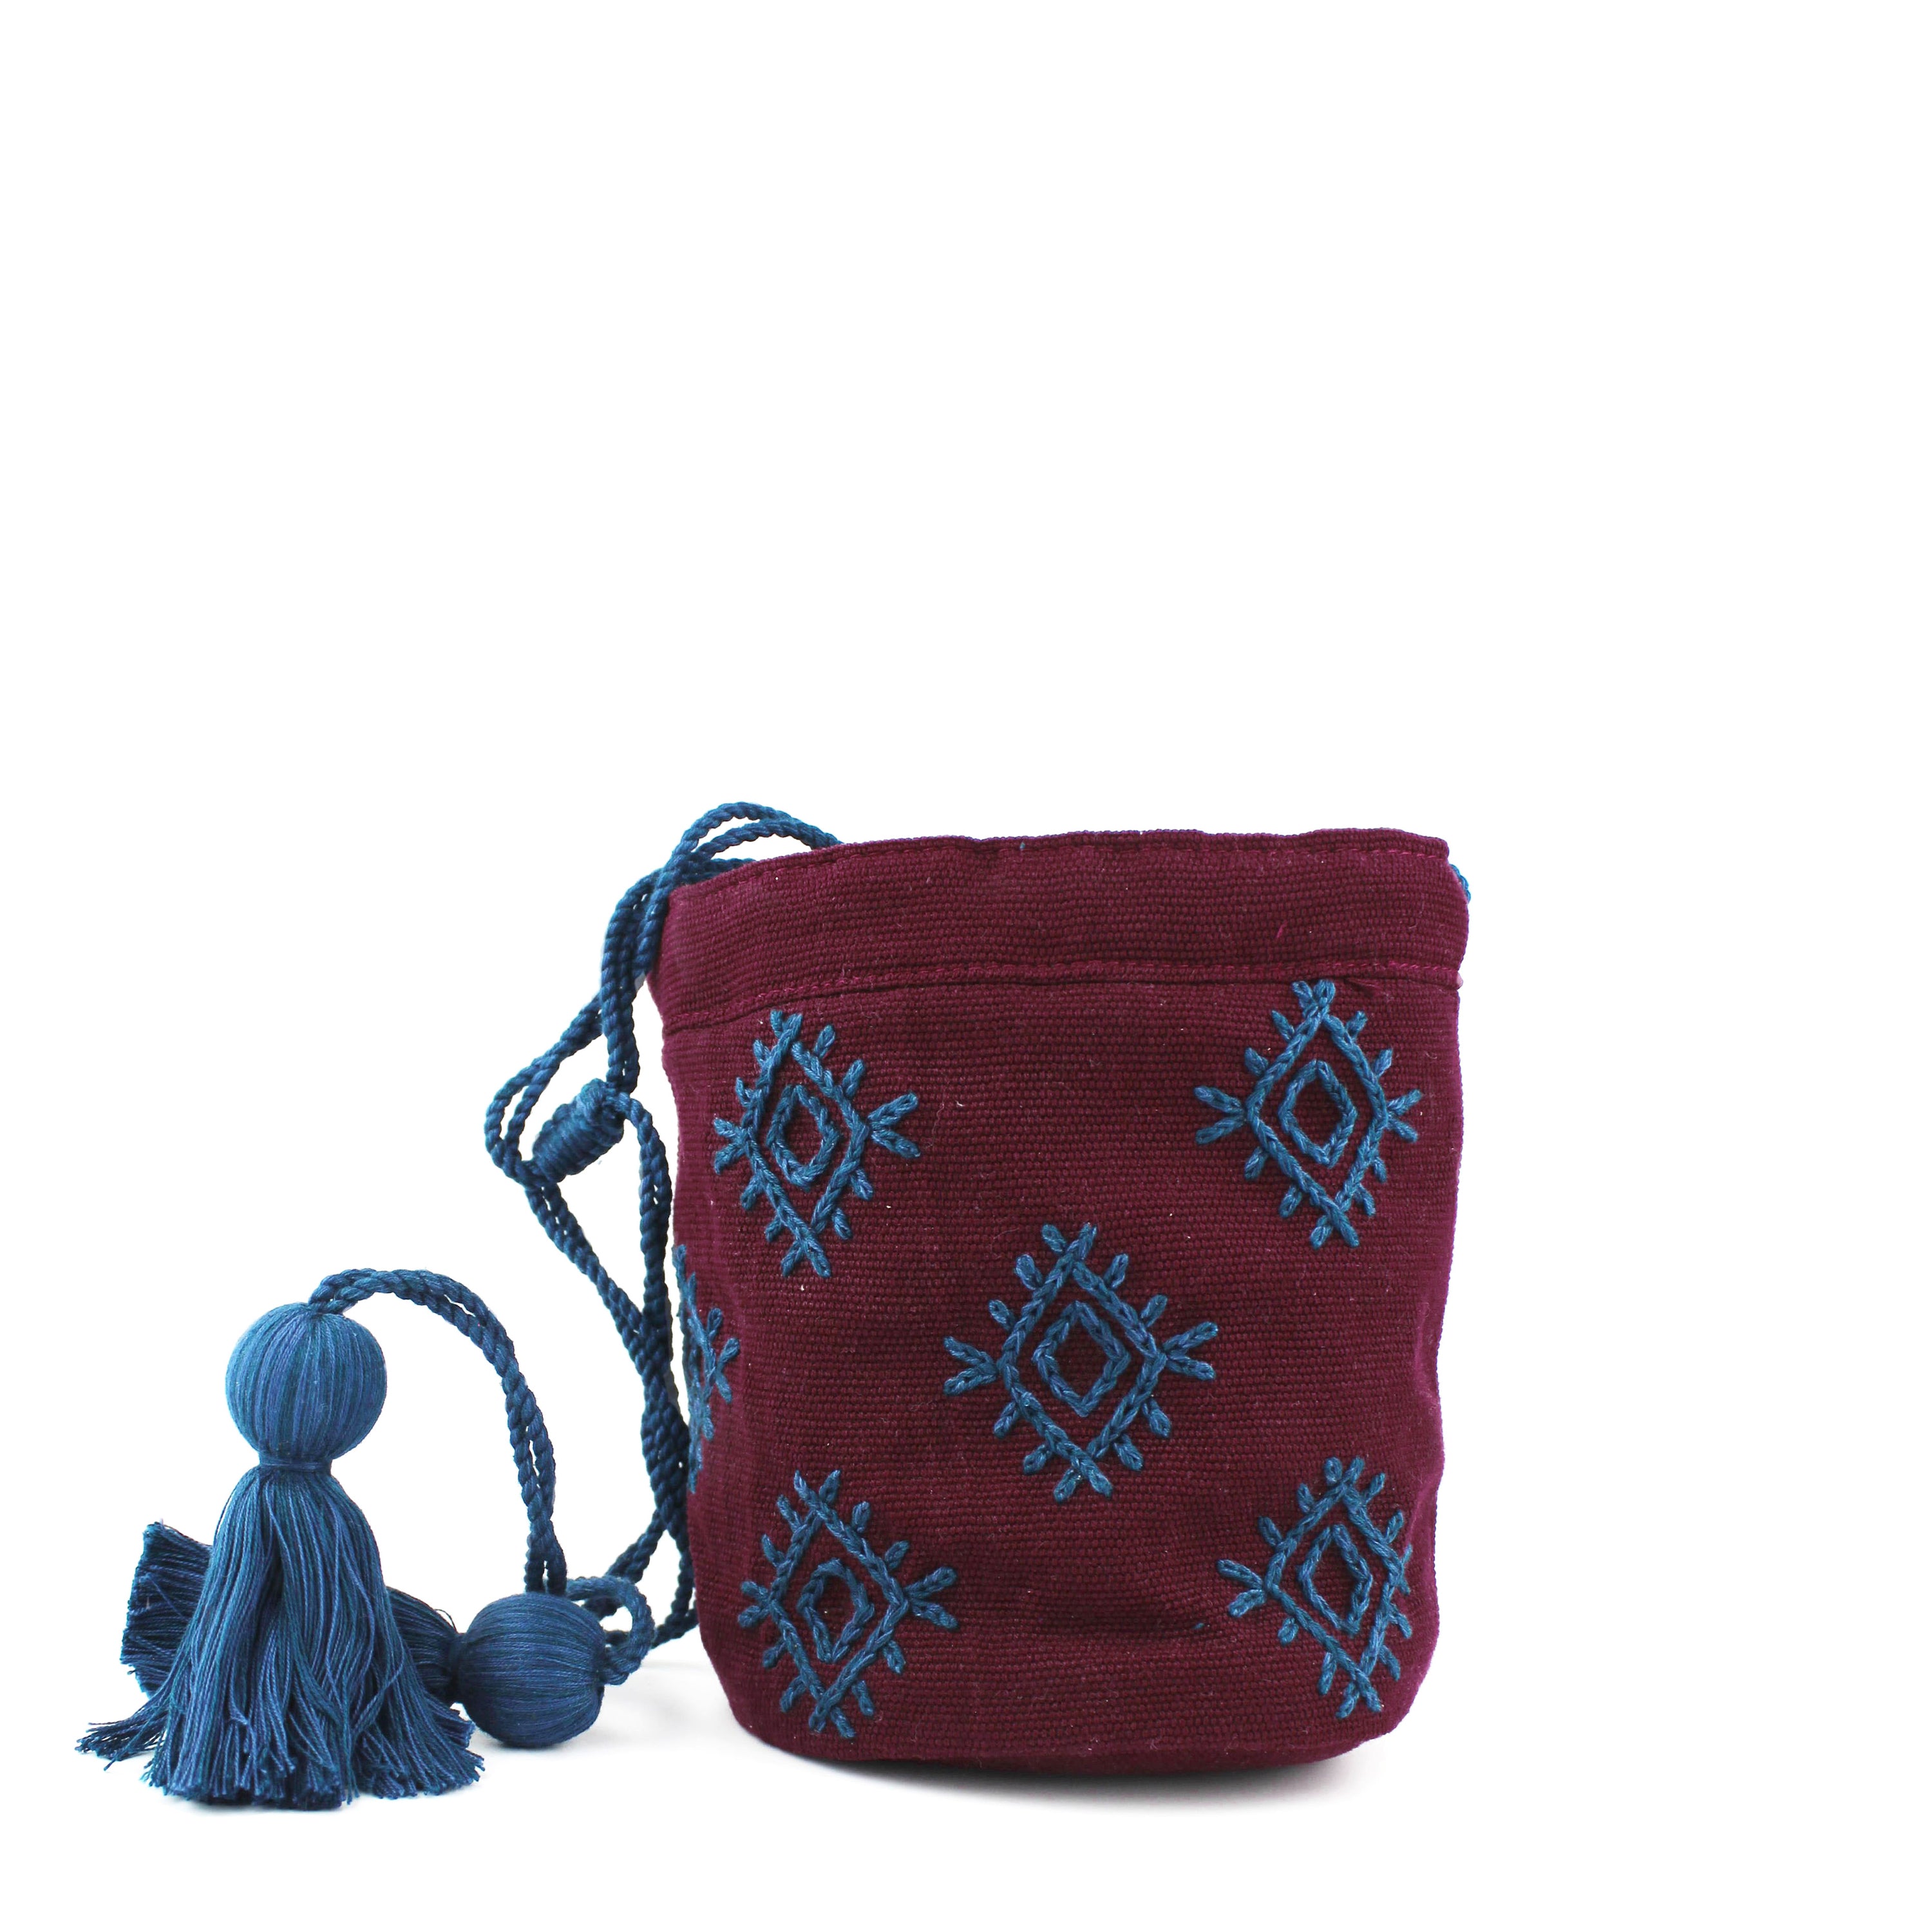 A view of the artisan hand woven Hermelinda Crossbody bag in Mountain Dusk. It has a cylinder shape when opened, with blue drawstrings and tassels threaded inside the hem. The Mountain Dusk pattern has blue embroidered diamond shapes over a maroon background.